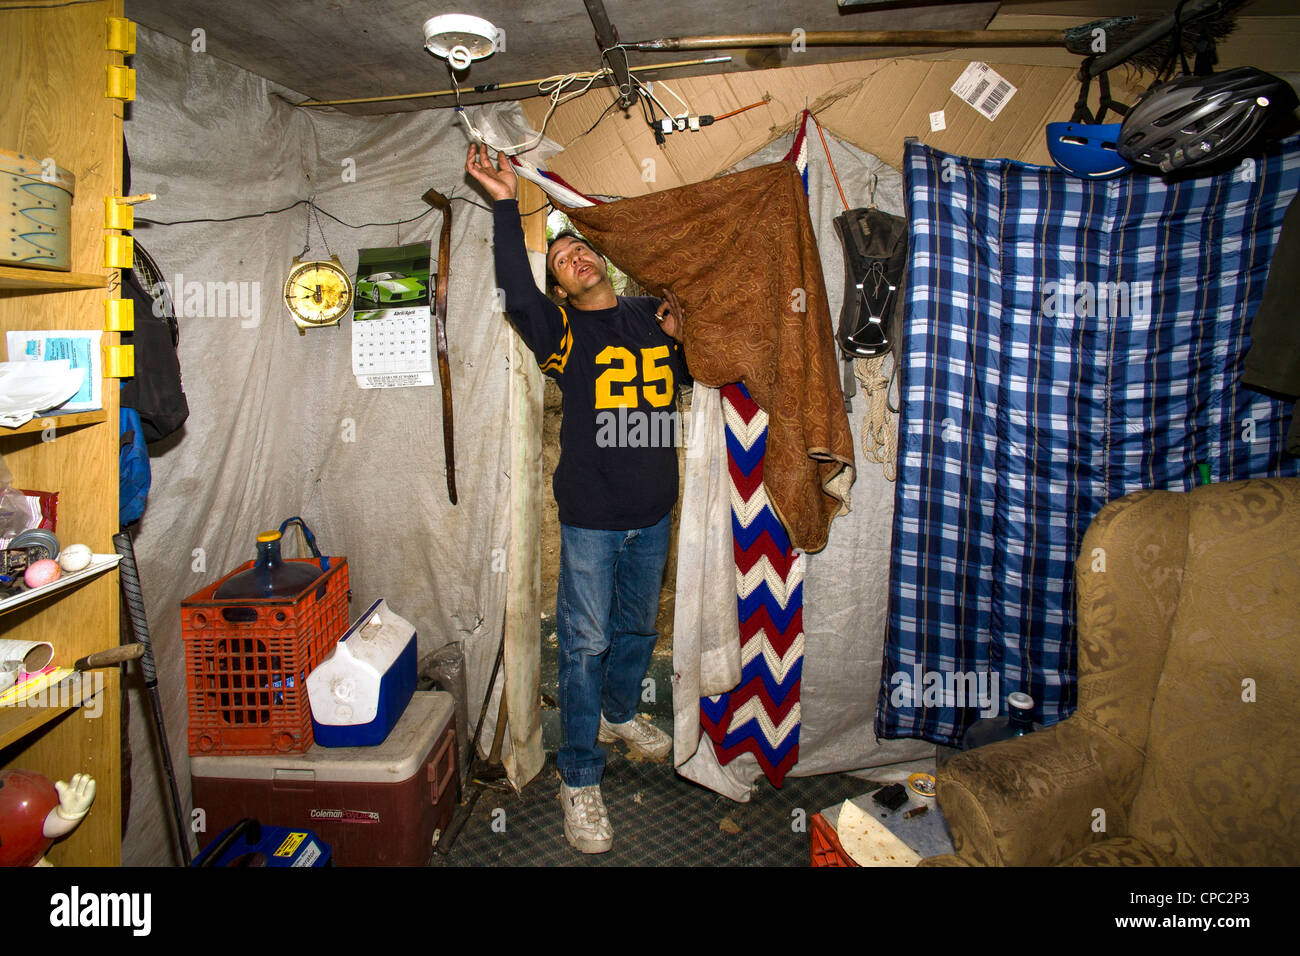 A military veteran enters his makeshift shelter among homeless residents of a primitive outdoor encampment in the desert. Stock Photo